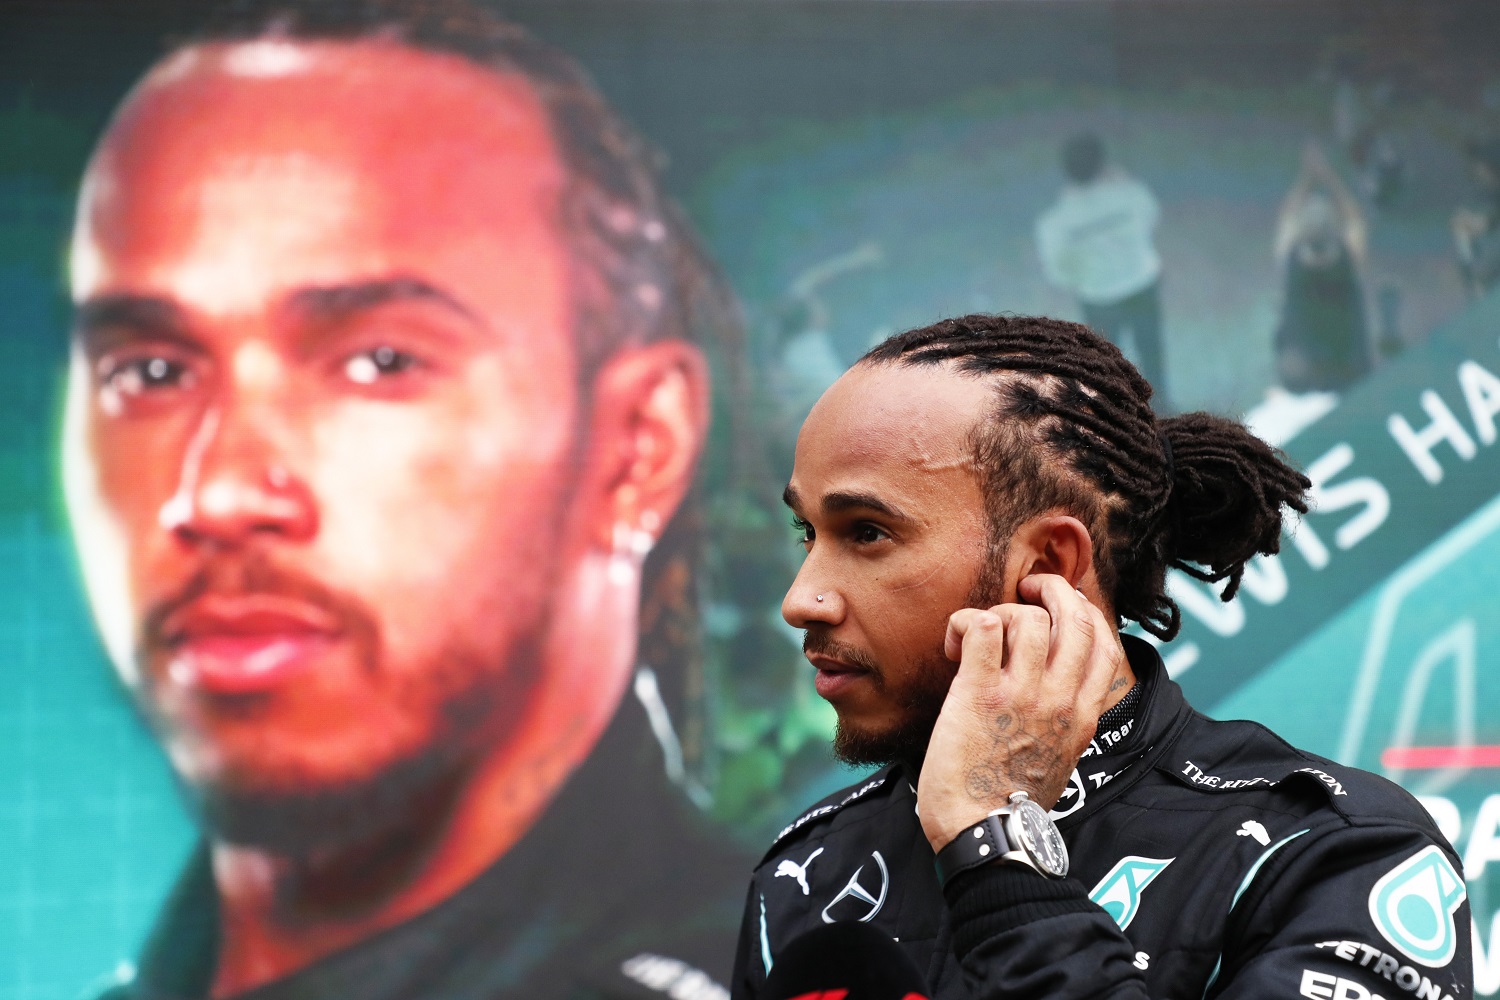 Race winner Lewis Hamilton looks on after the F1 Grand Prix of Russia at Sochi Autodrom on Sept. 26, 2021. | Yuri Kochetkov - Pool/Getty Images